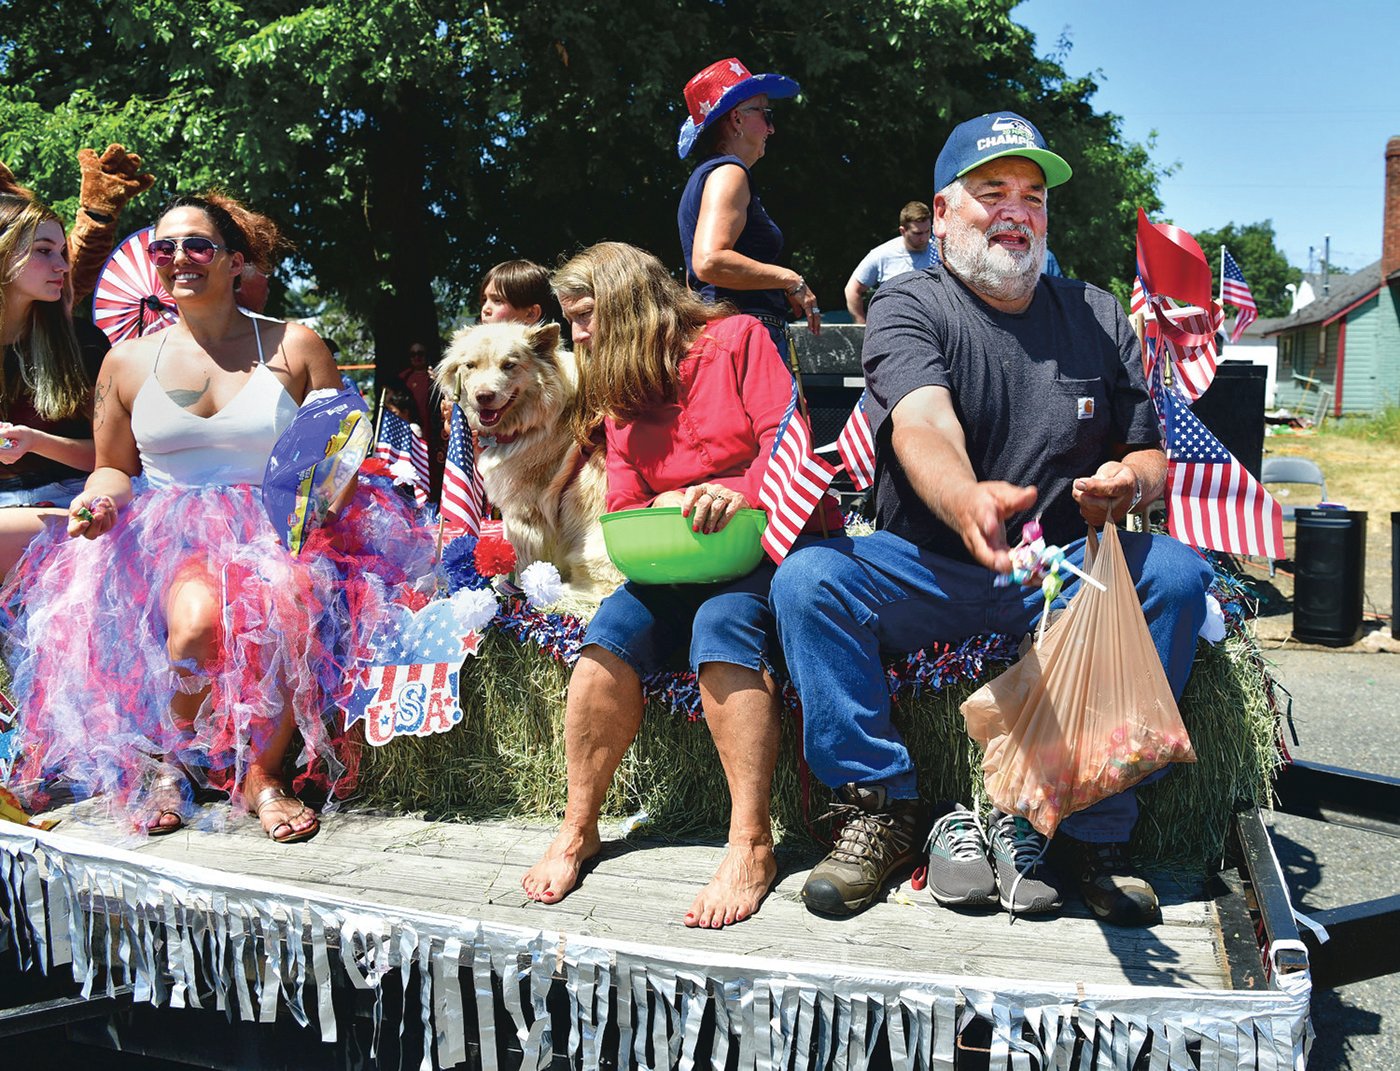 The Lacamas Community Center will hold its annual Independence Day parade in Roy on Monday, July 4.